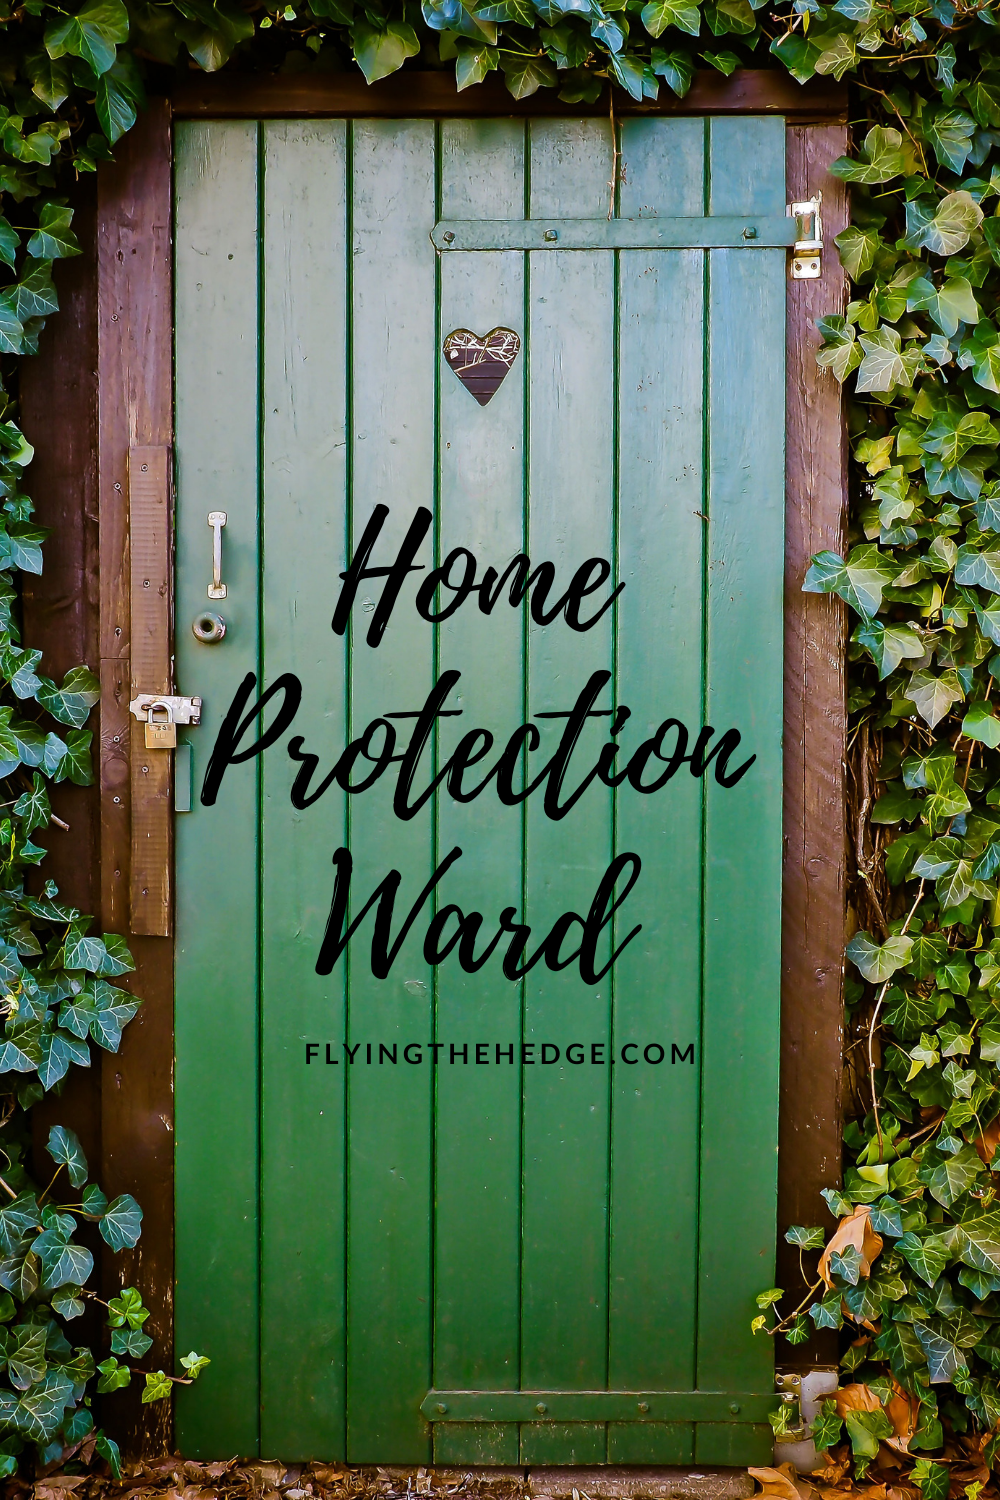 protection, spell, ritual, ward, witchcraft, witchy, hedgewitch, home protection, protection spell, magic, magick, wicca, wiccan, pagan, neopagan